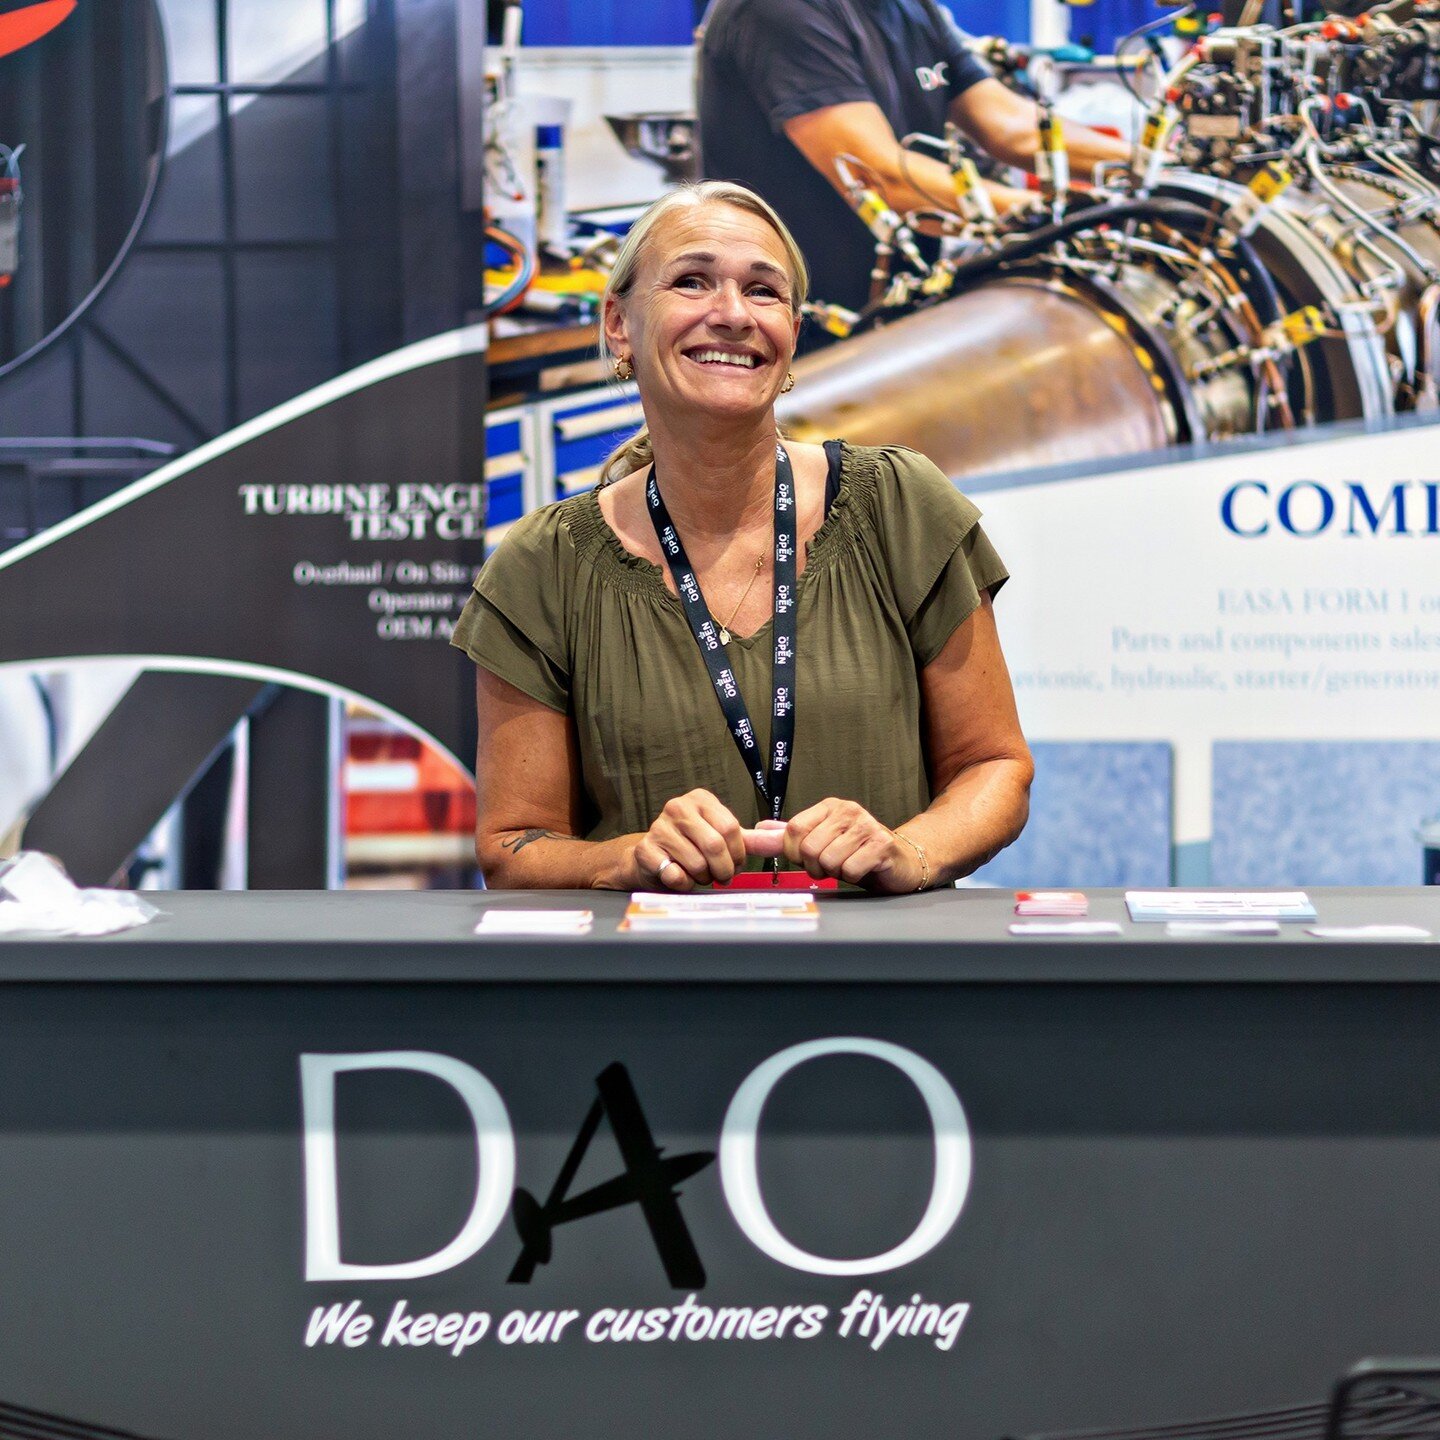 DALO Industry Days 

A professional setup and a year with significant interest for our business. Especially our EMAR military approval, but also our capabilities in our MRO for business aircraft including a one-stop shop policy for parts, engine, pro